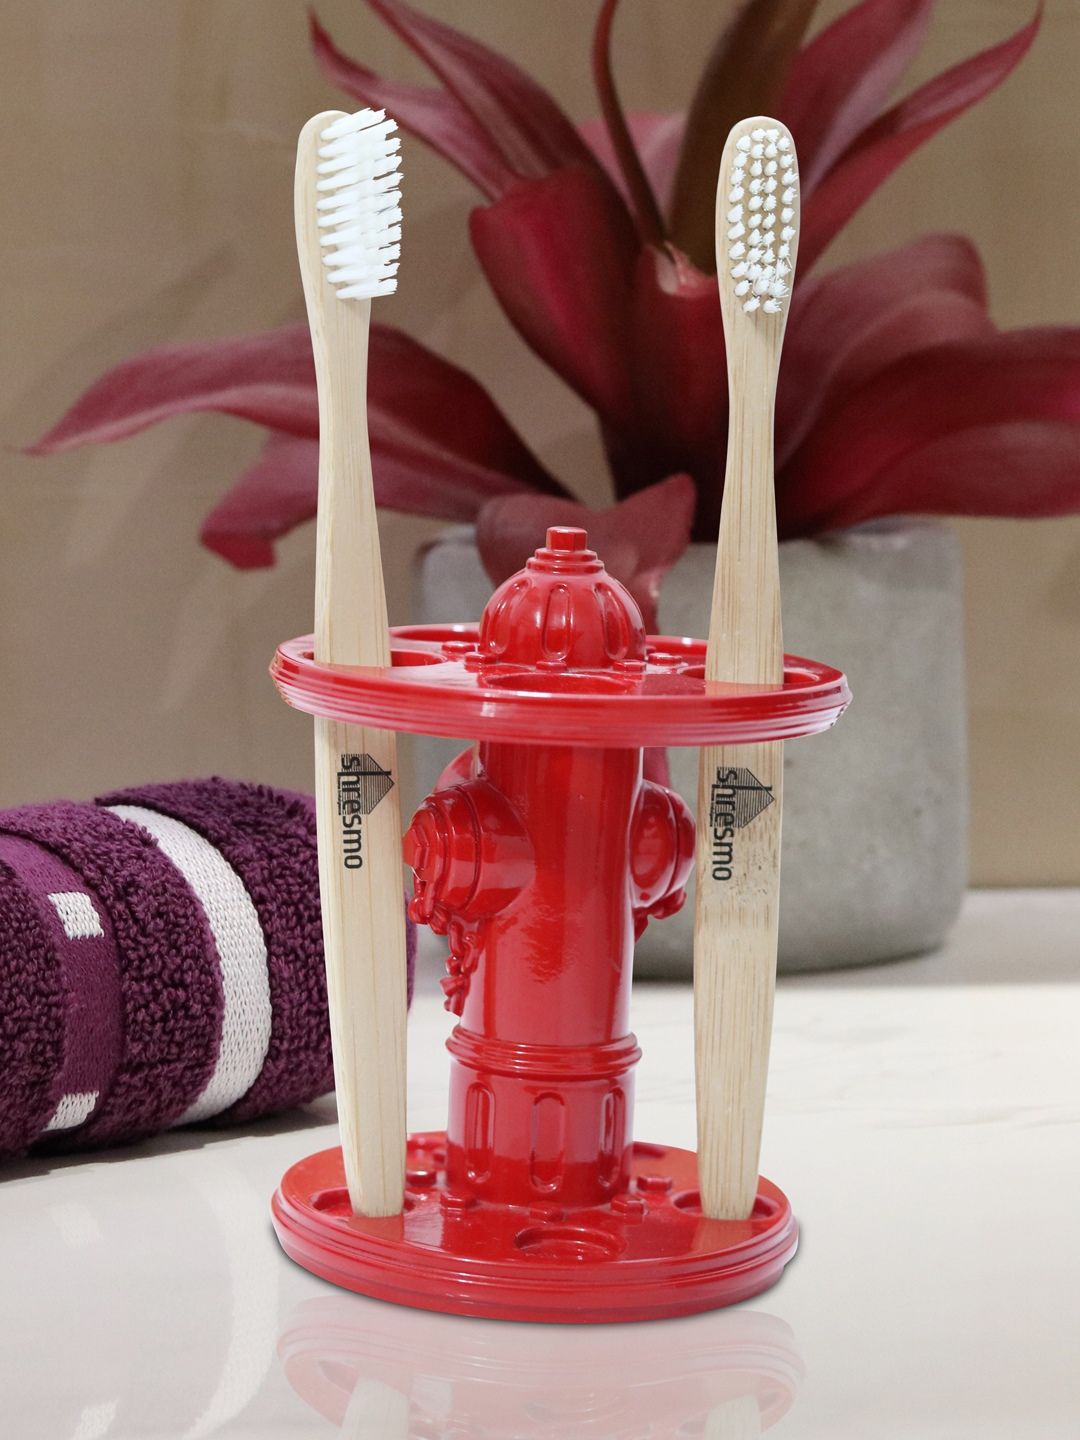 Shresmo Red Fire Hydrant Toothbrush Holder Price in India